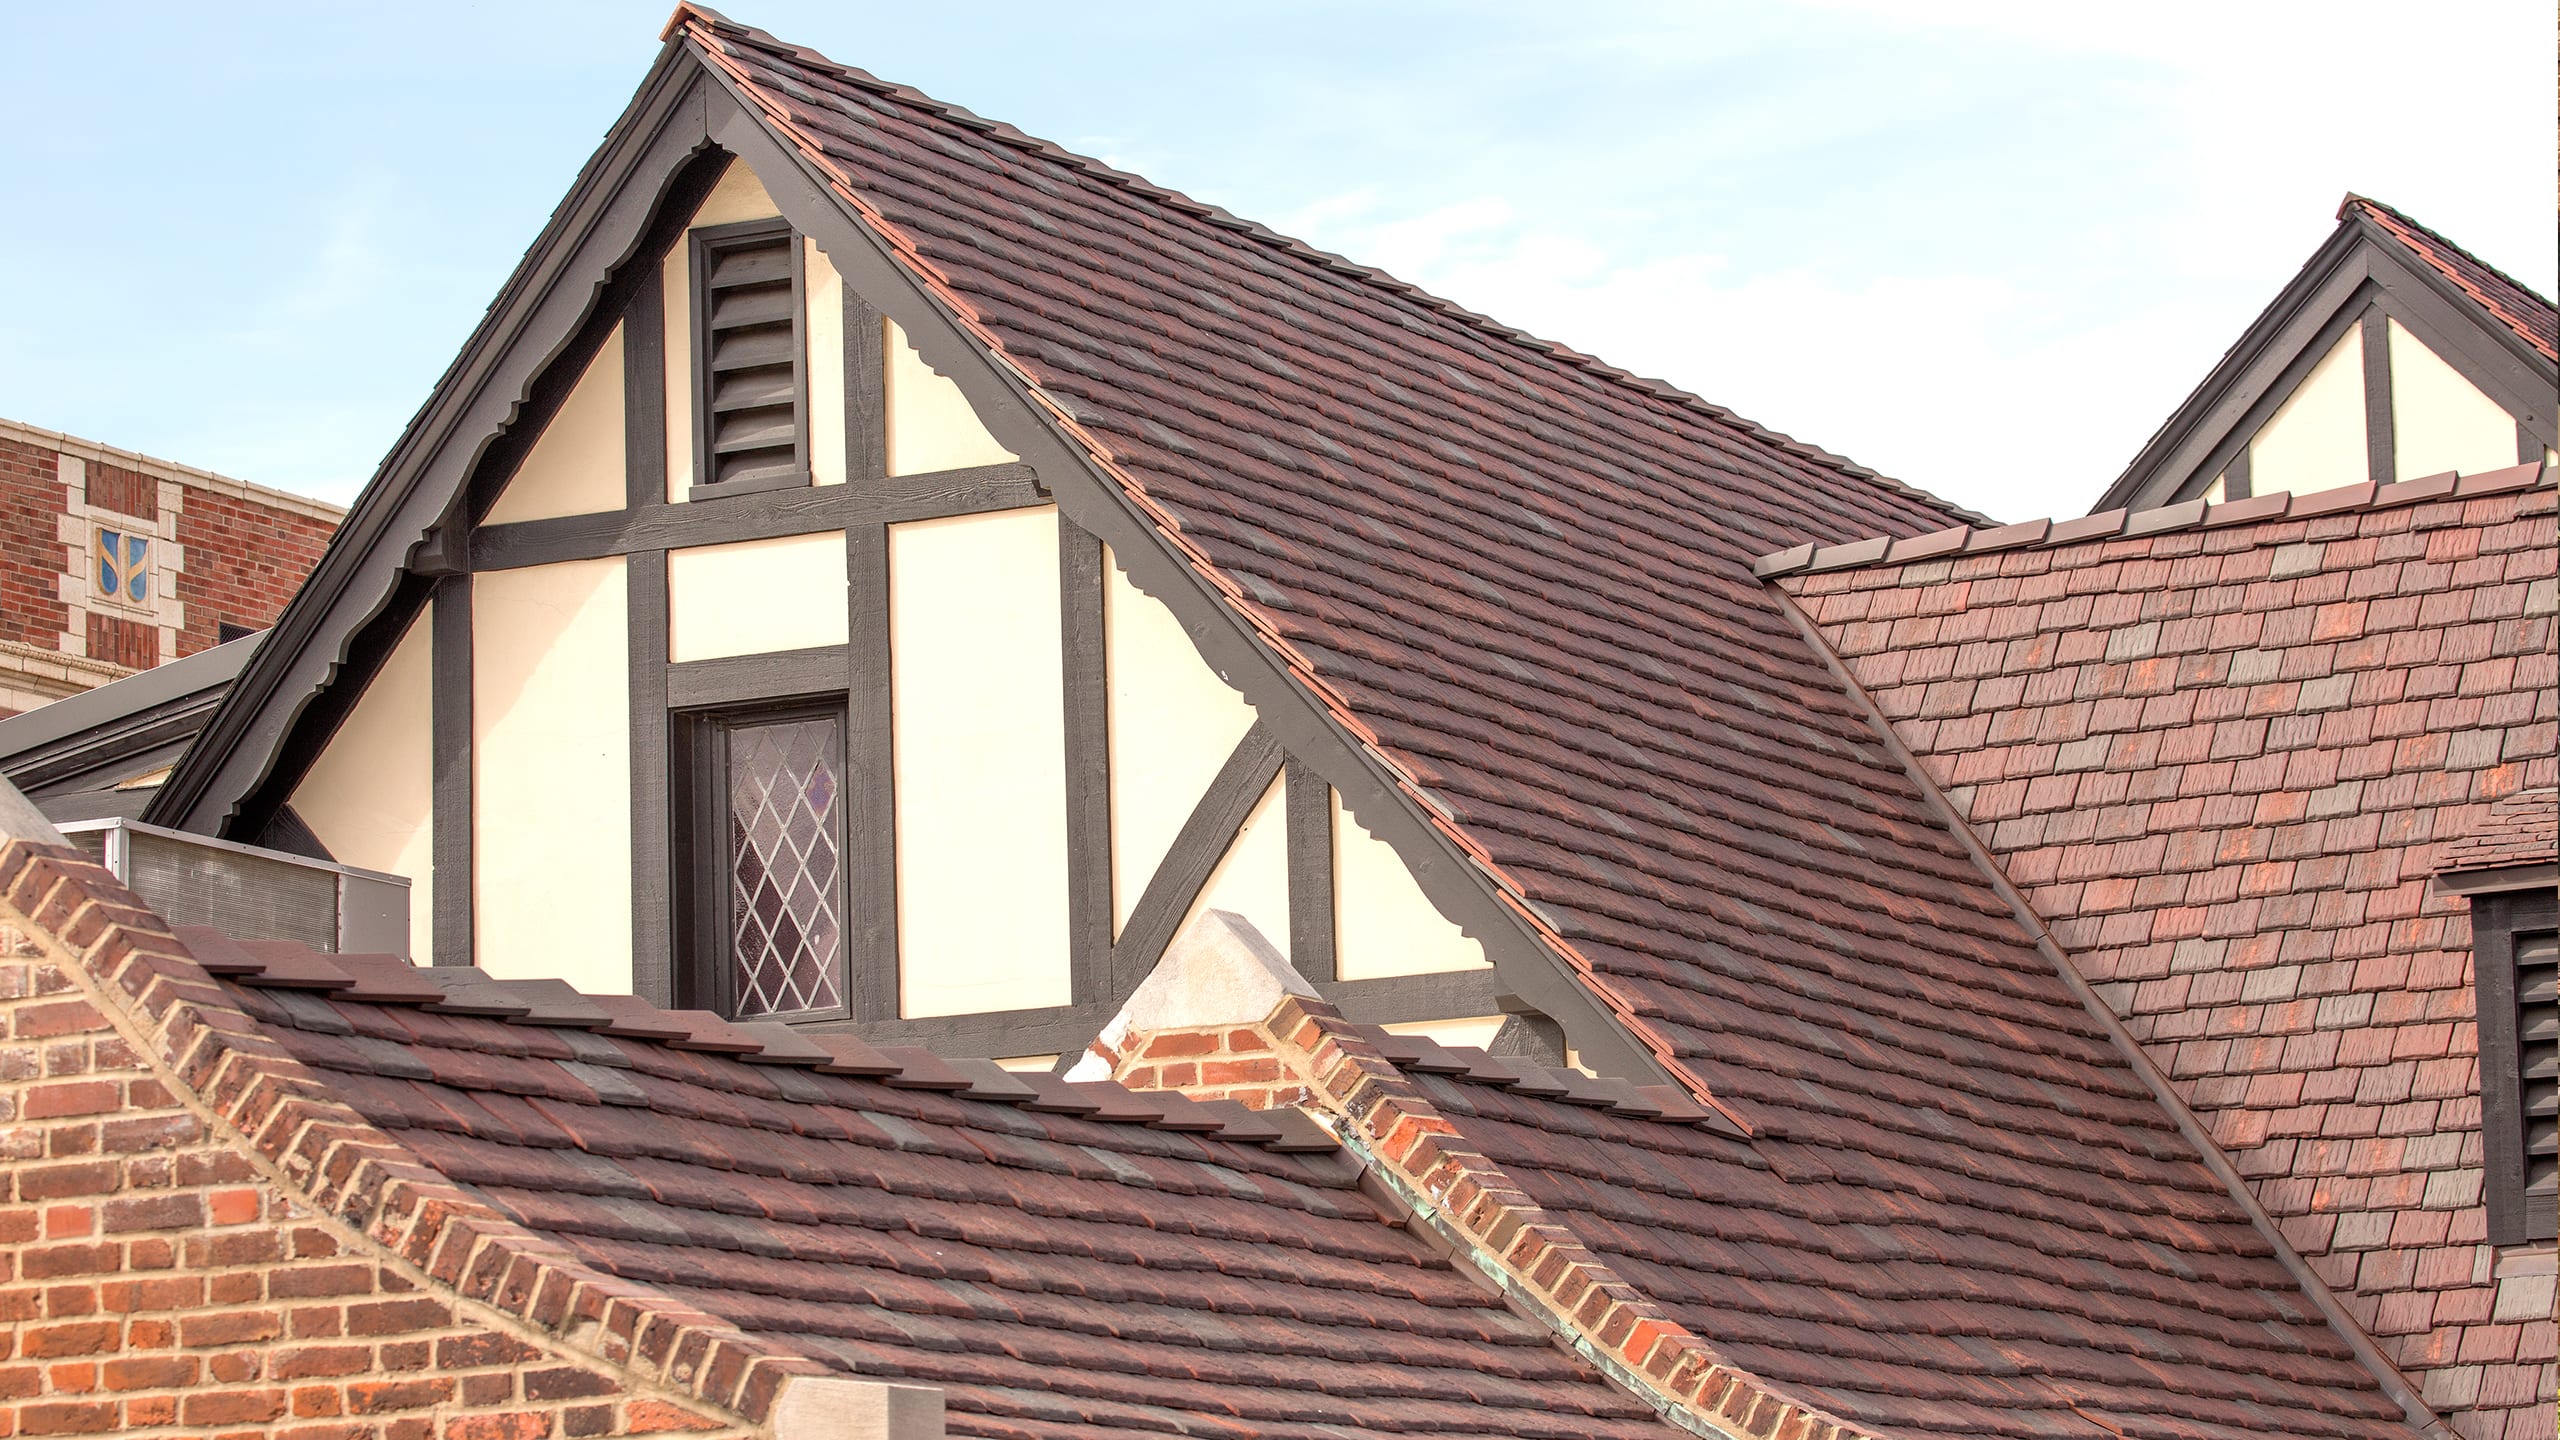 Cheshire Inn Boundary Restaurant Featuring Ludowici Colonial Clay Roof Tile